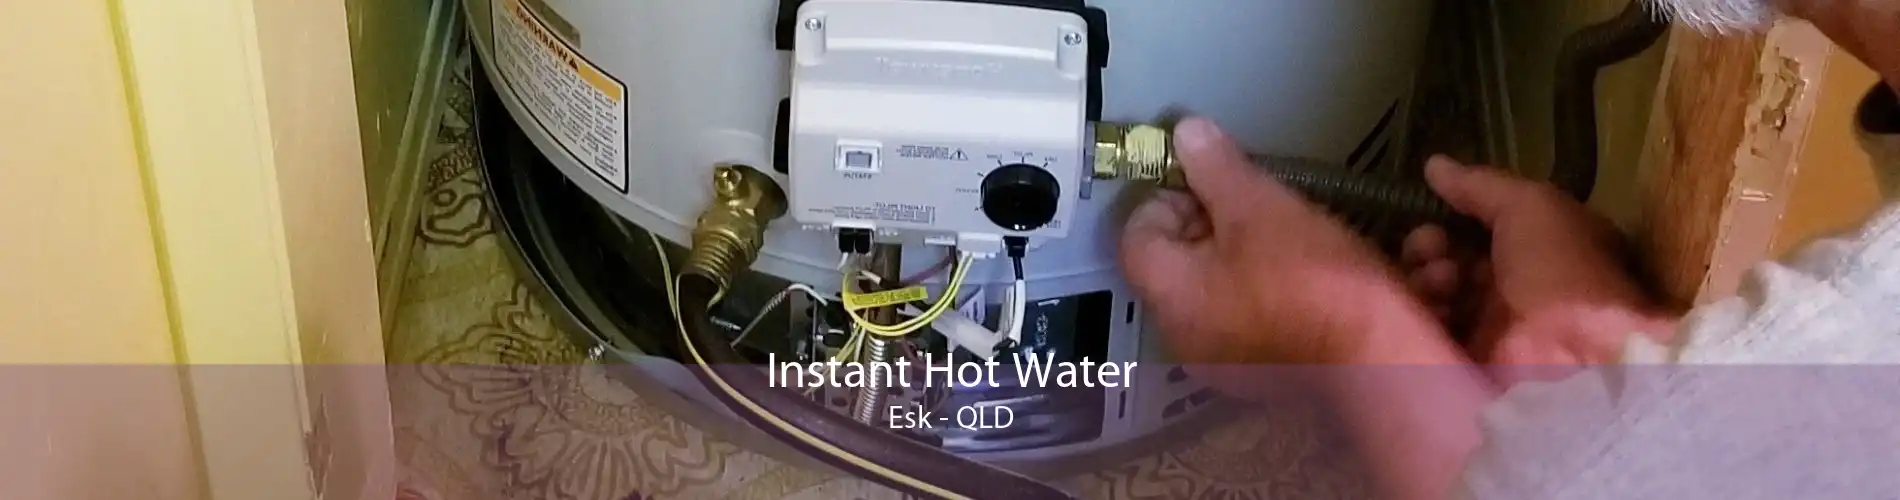 Instant Hot Water Esk - QLD